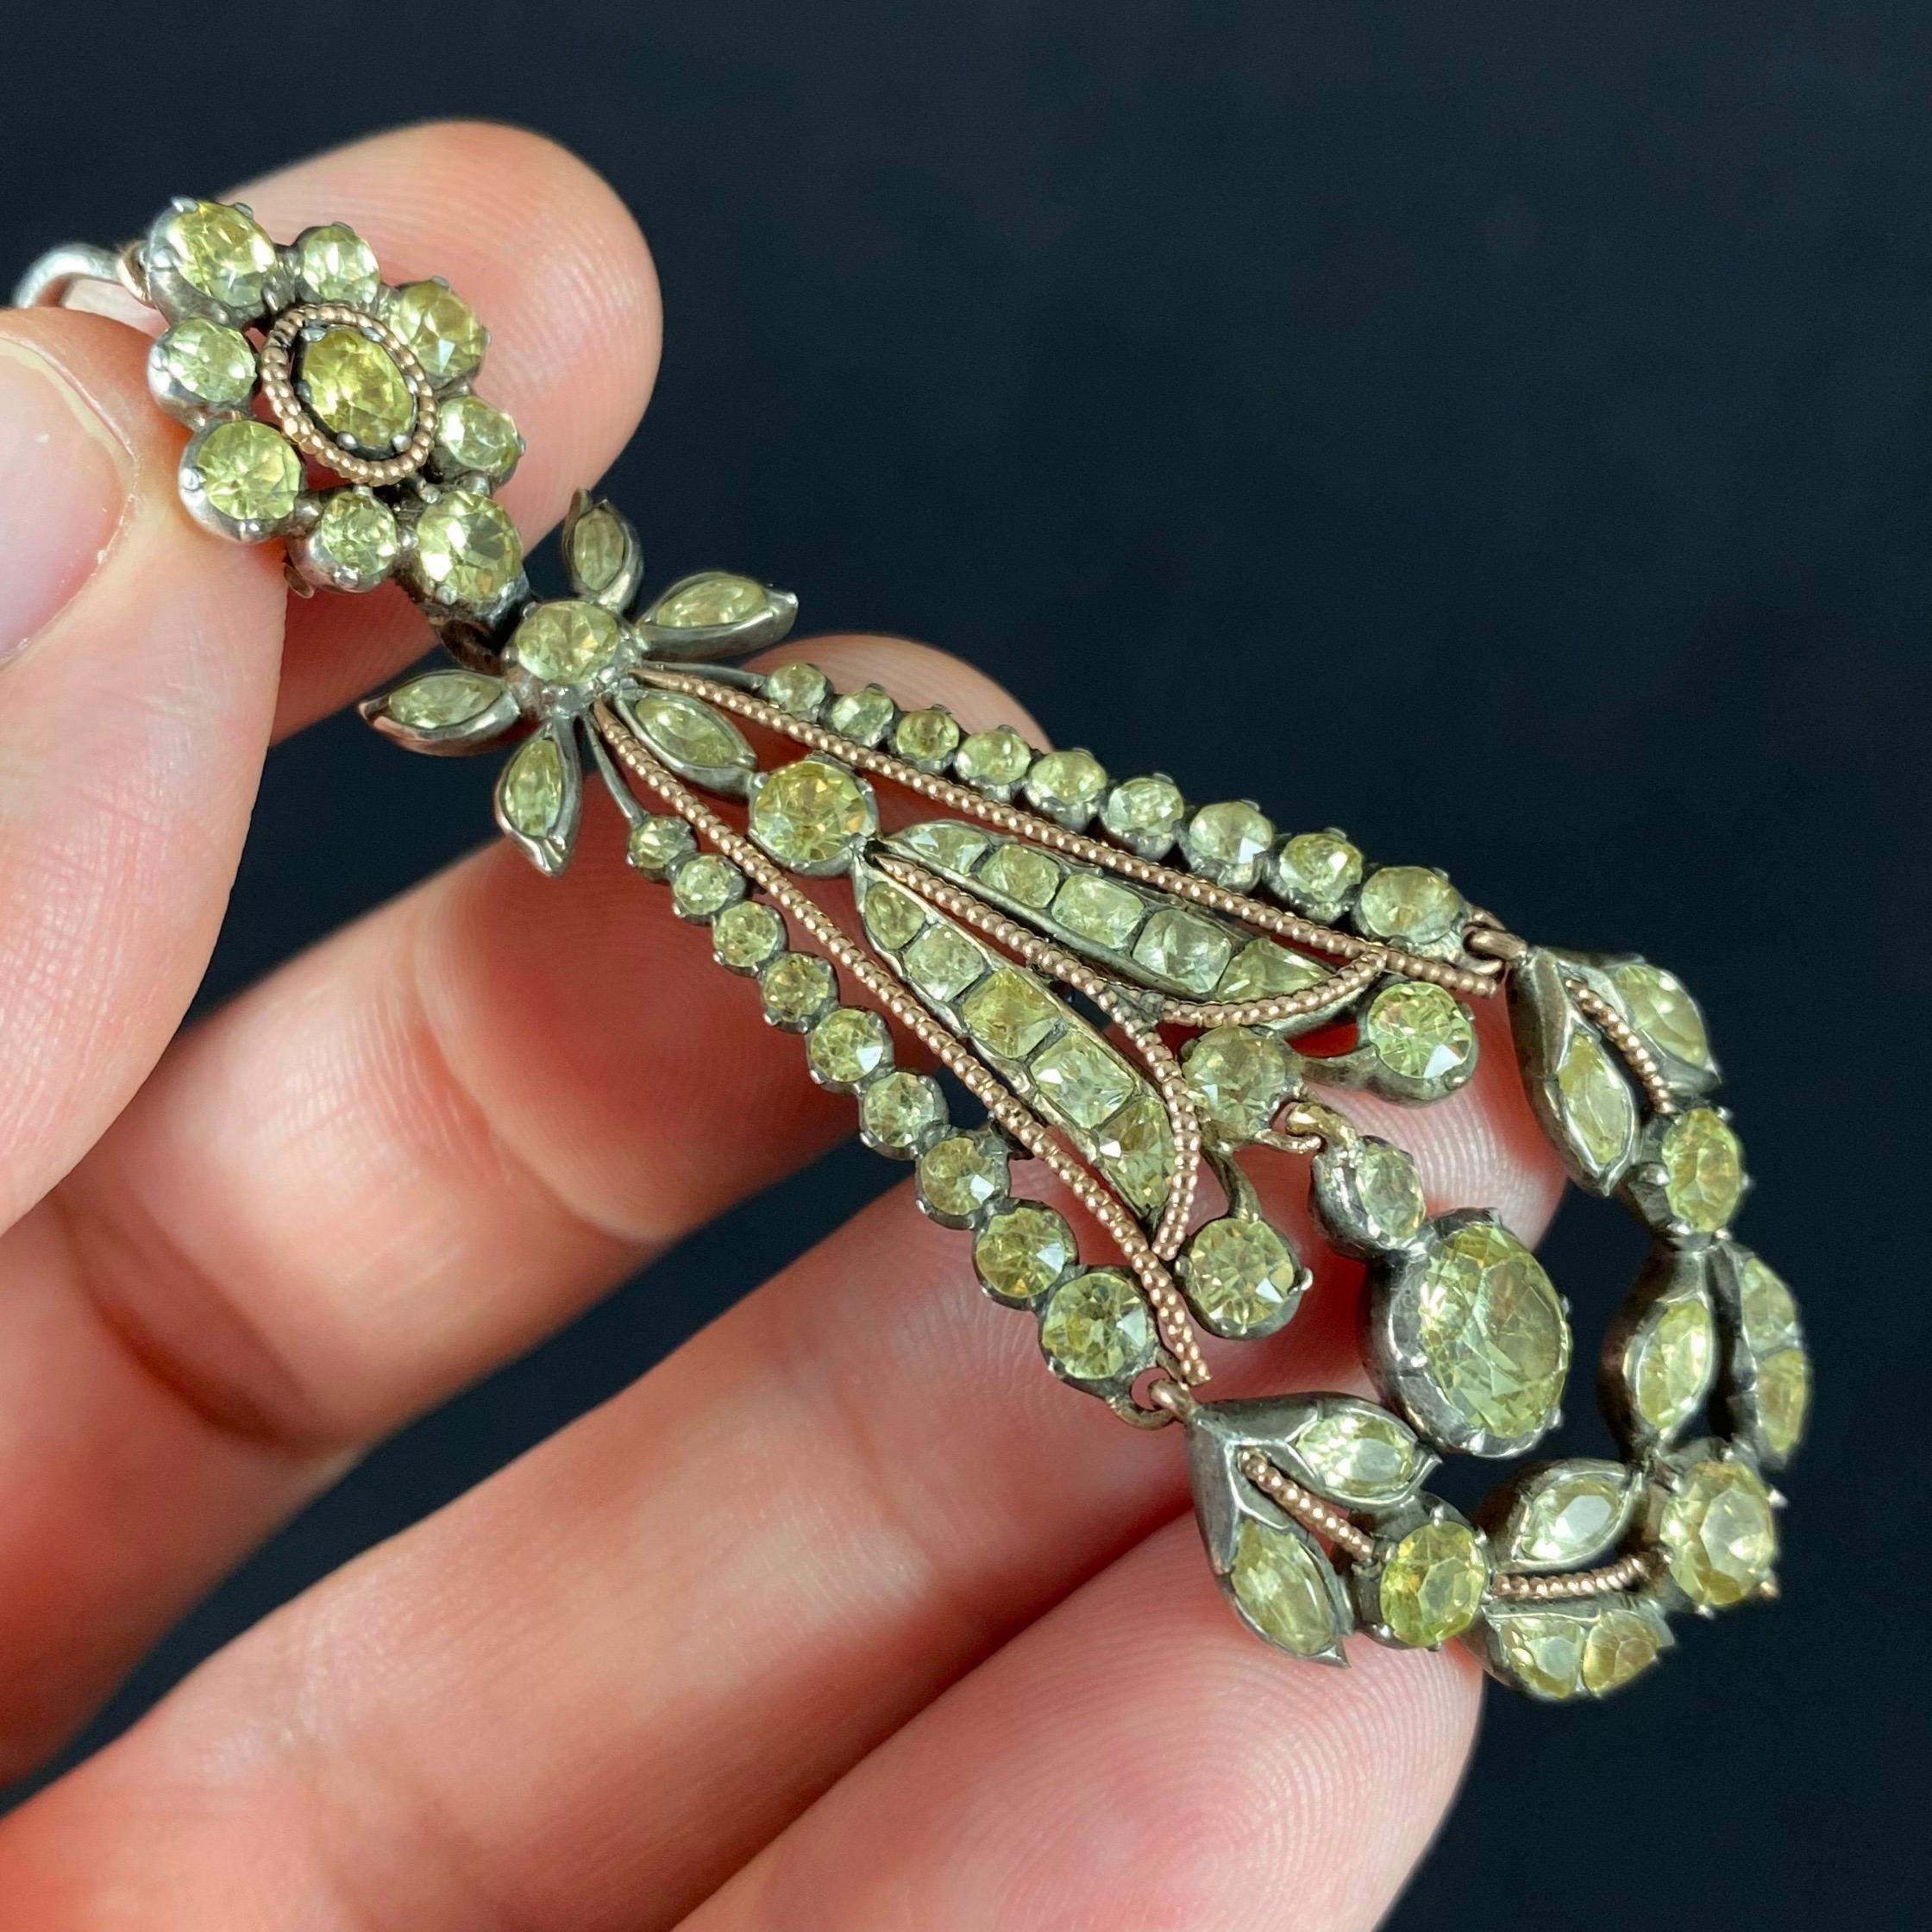 Antique 18th/19th Century Chrysolite Chrysoberyl Pendant Earrings Portuguese In Good Condition For Sale In Lisbon, PT